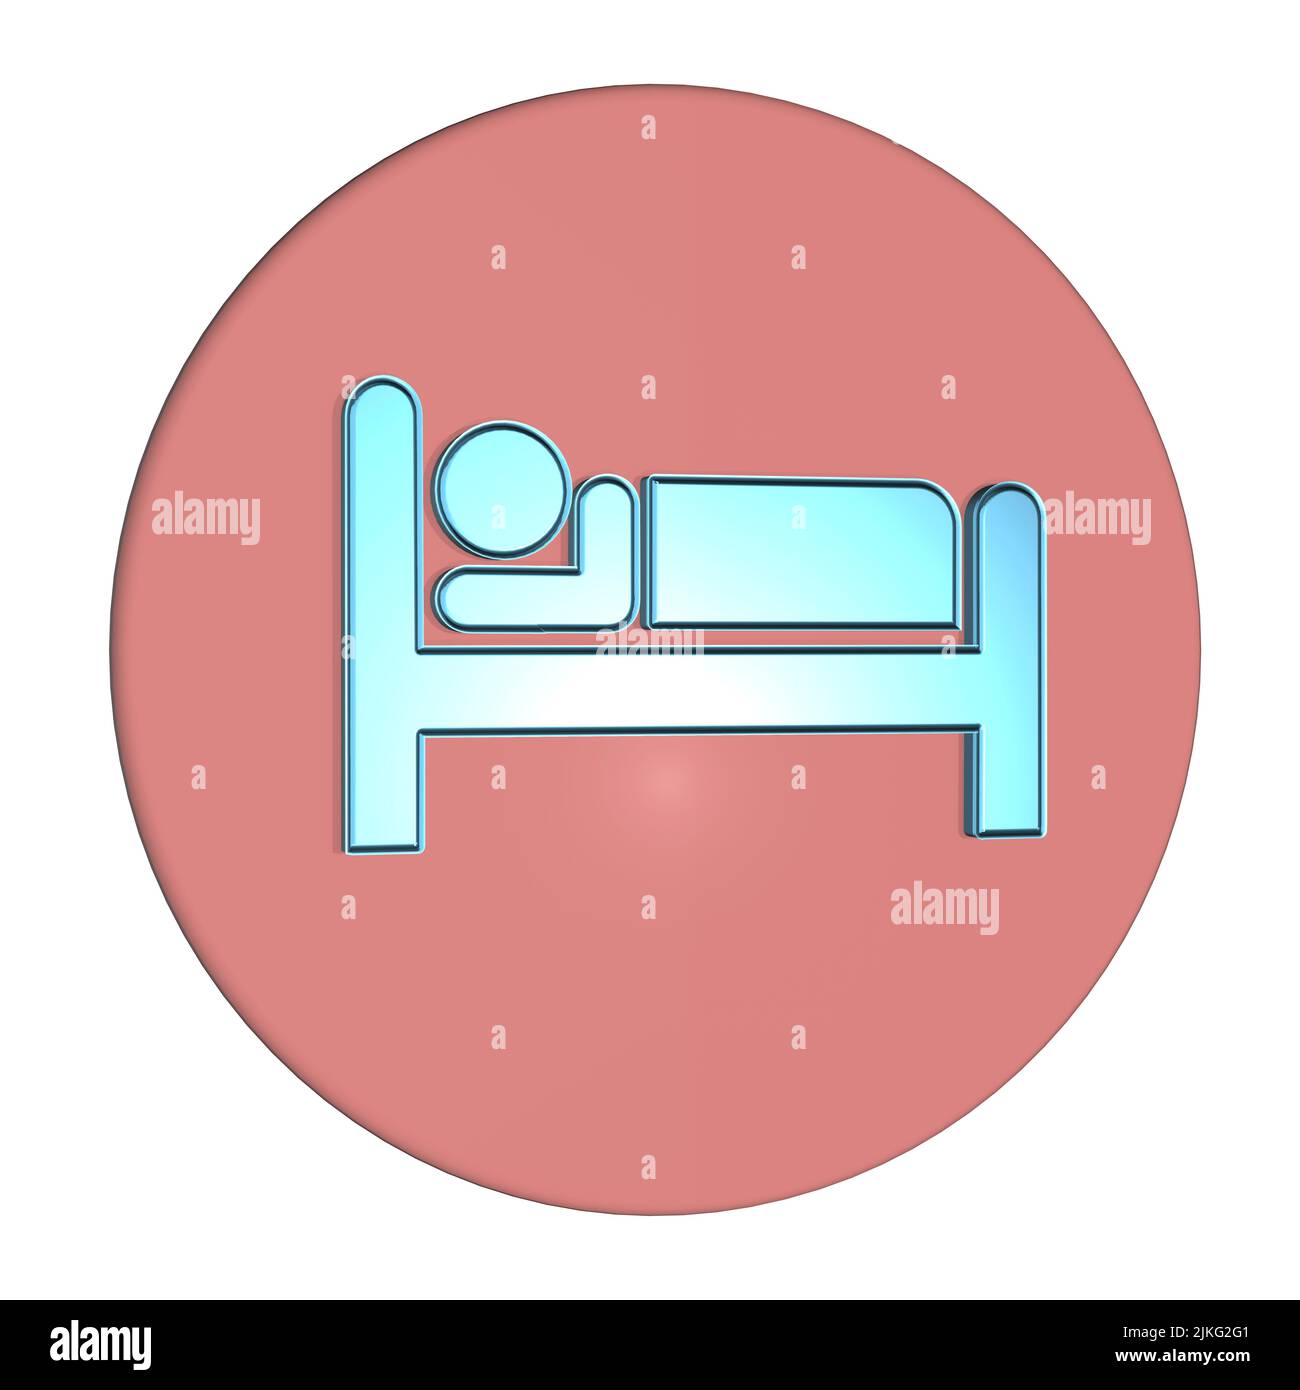 graphic design logo of sleep sleeping concept figure in bed asleep part of healthy lifestyle concept Stock Photo